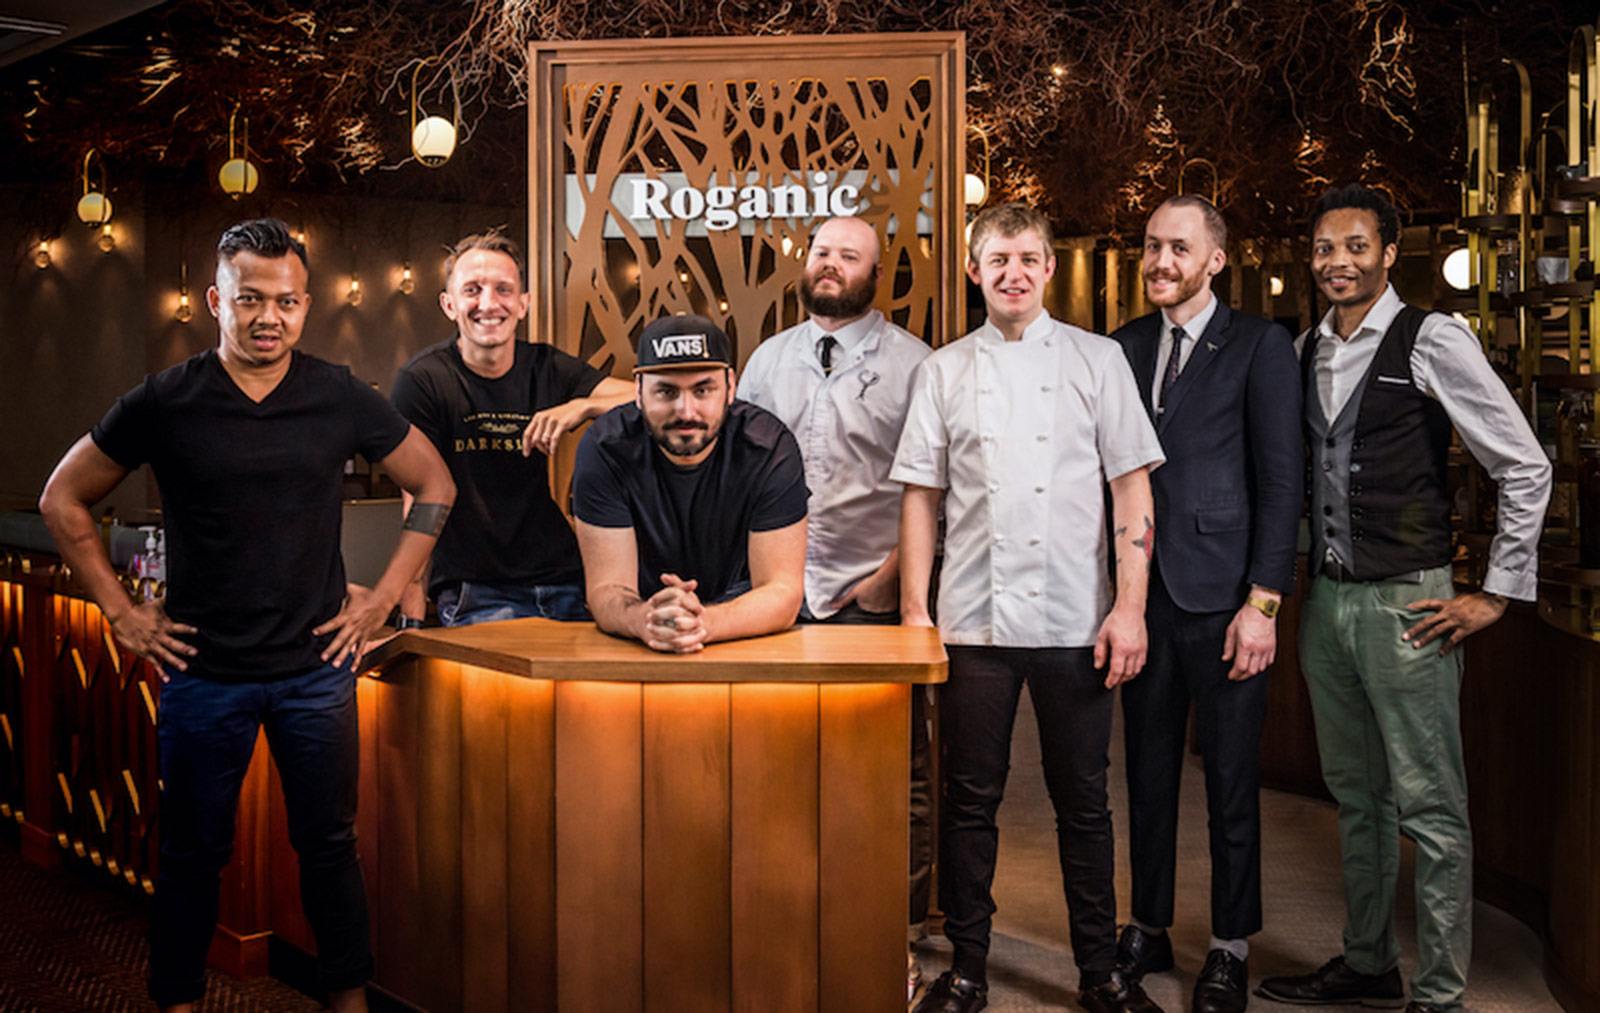 Best-Things-to-do-in-Hong-Kong-in-October-Roganic-bartender-series-group-photo